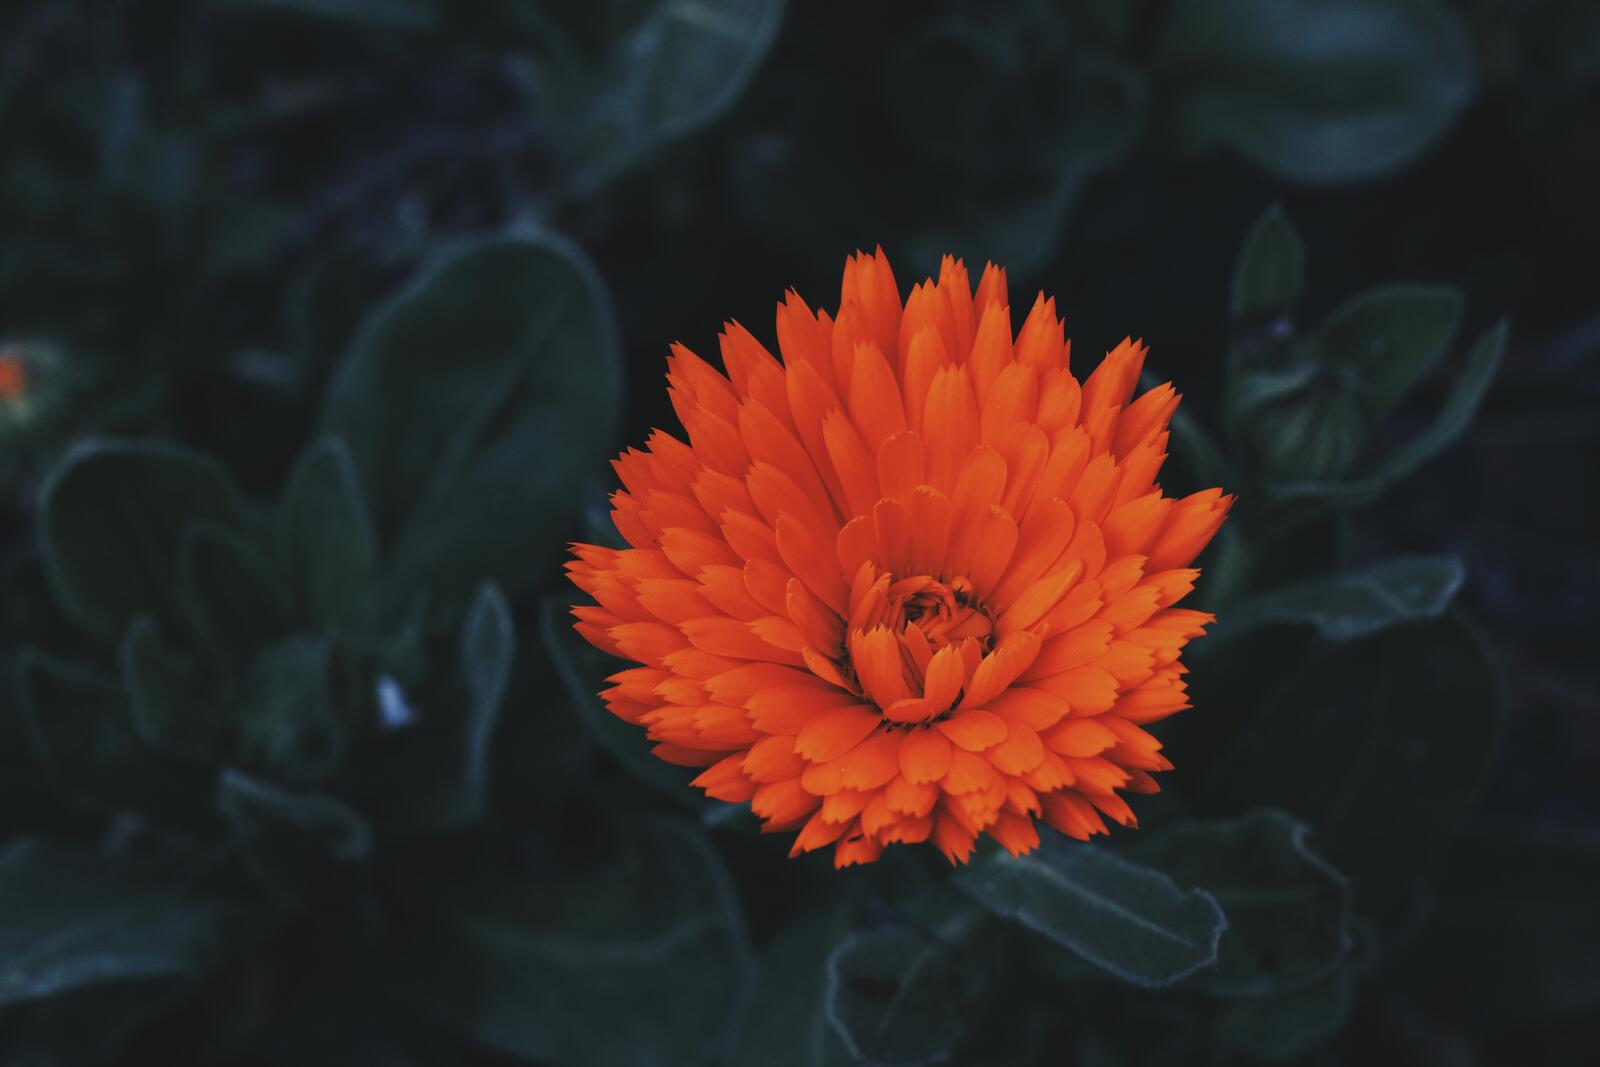 Free photo A stunning orange flower with many petals